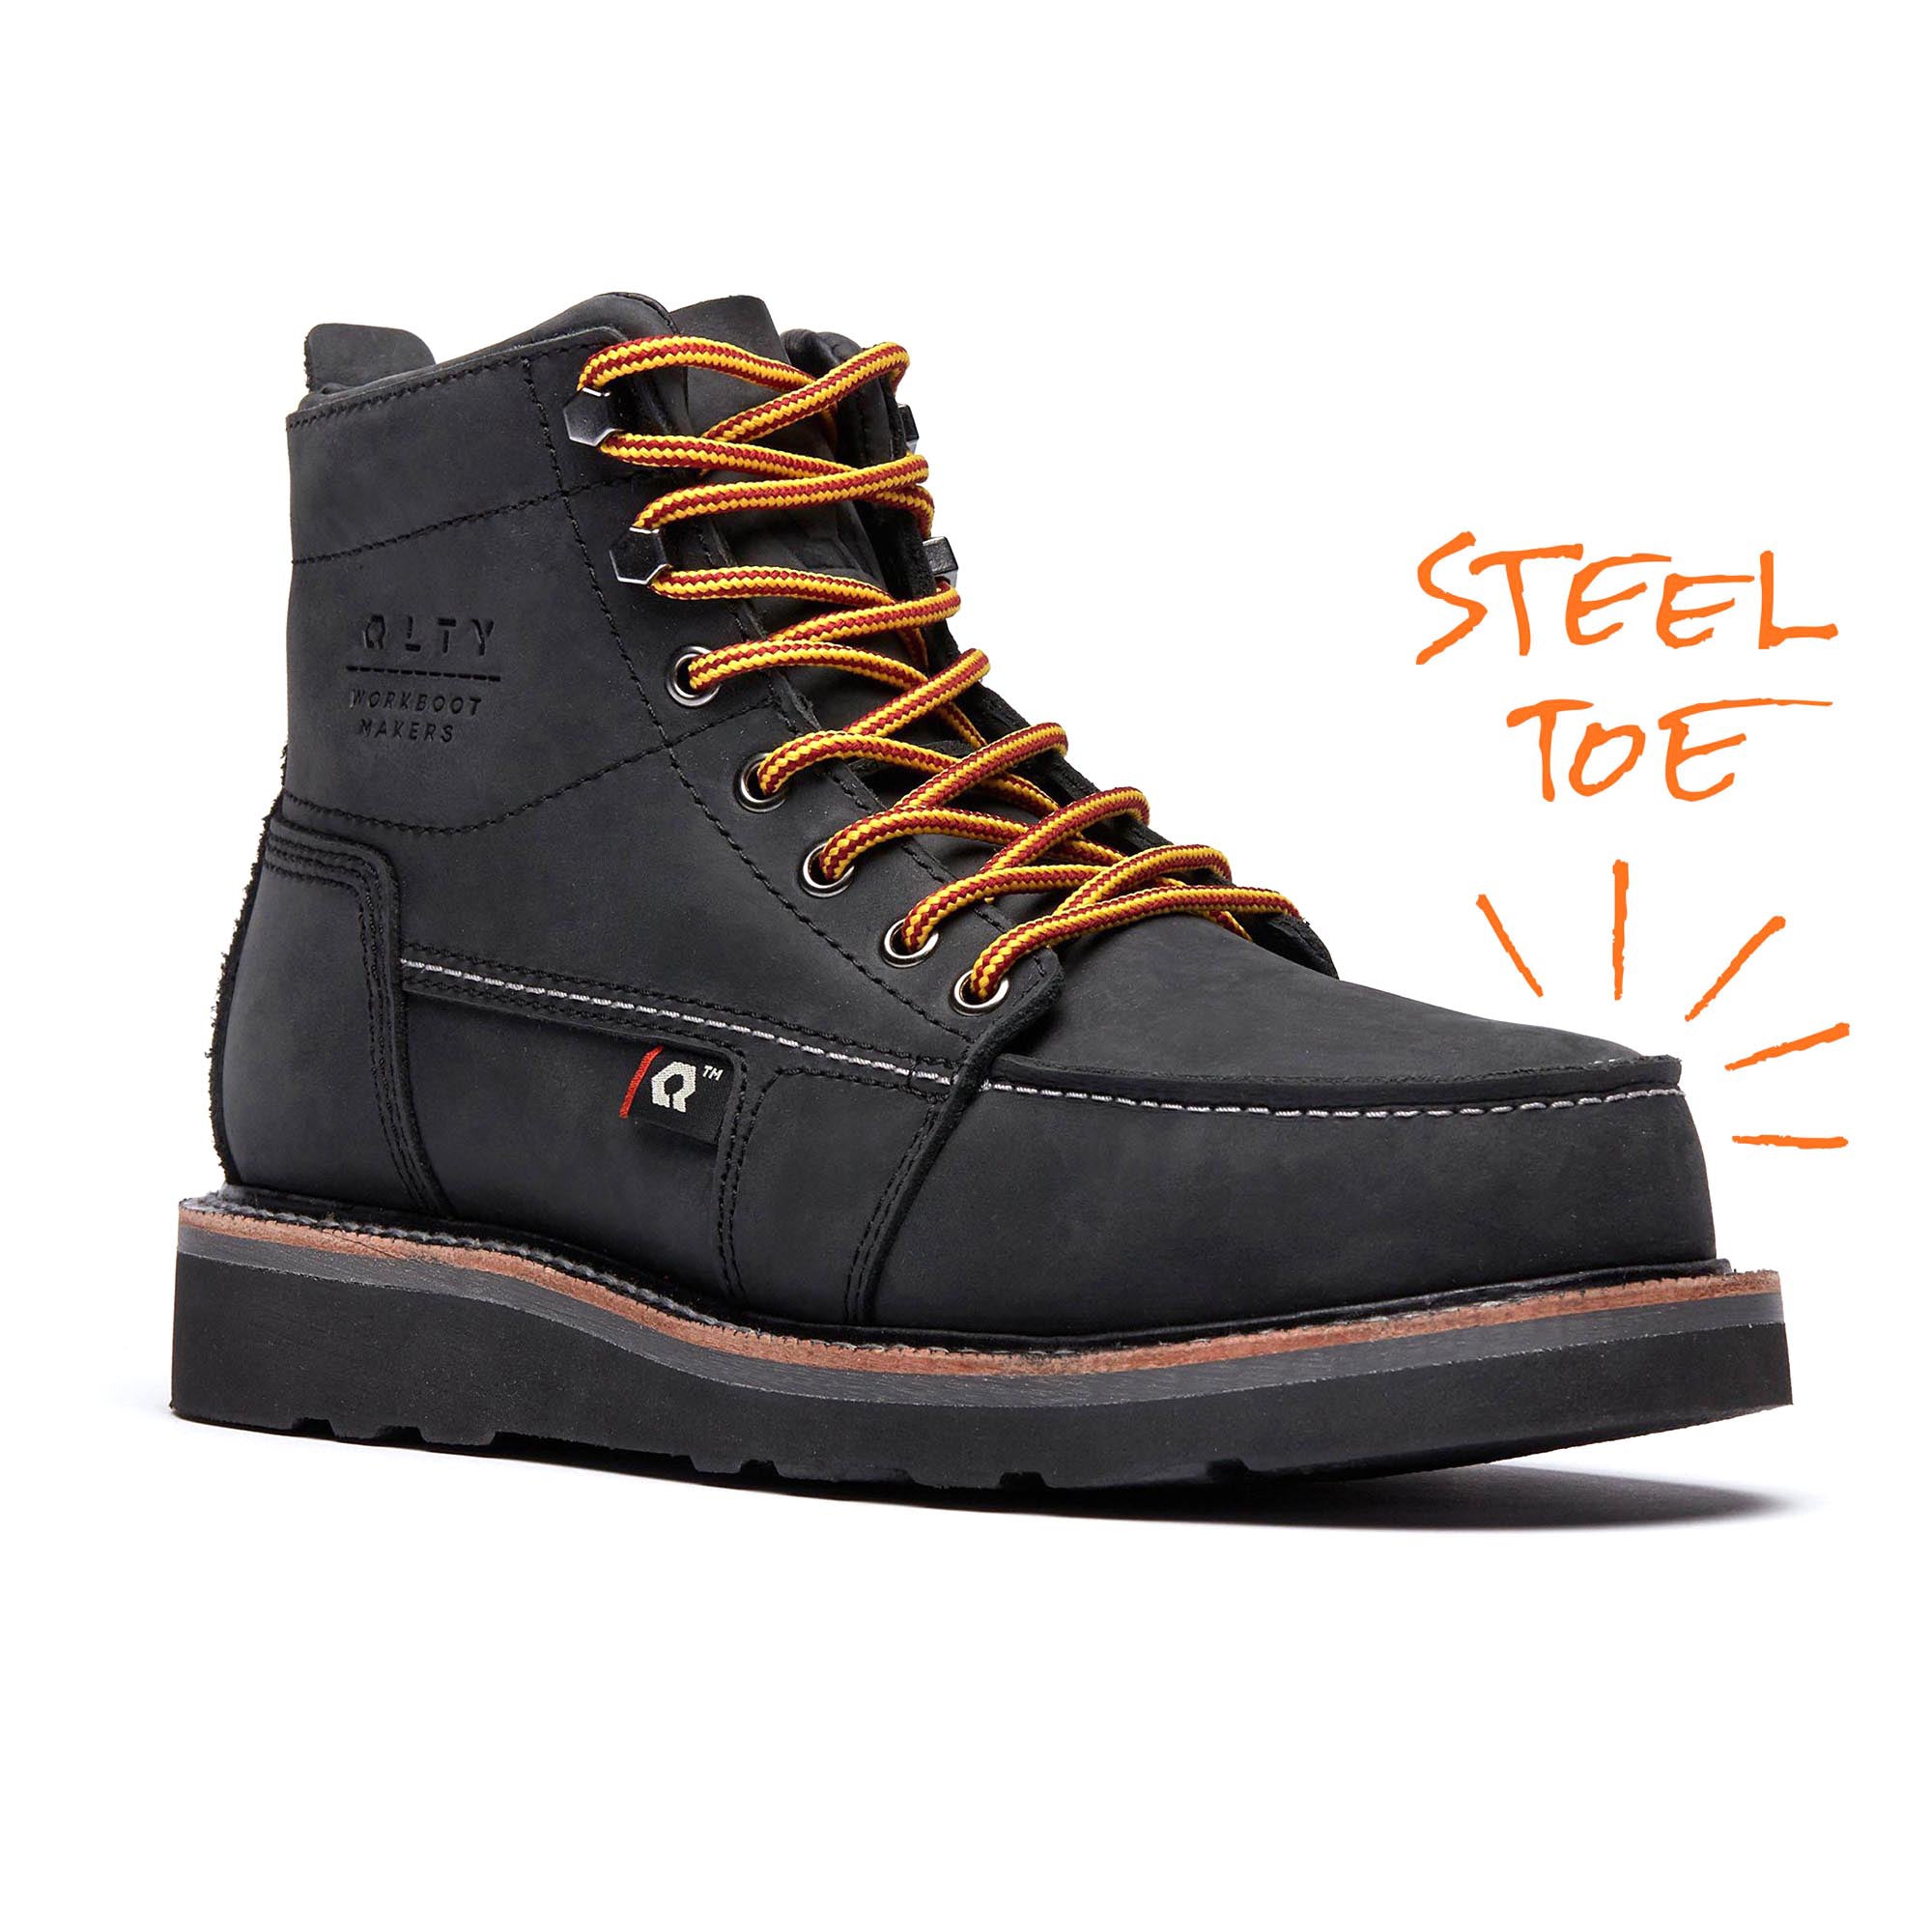 QLTY | Work Boot - The Steel Toe Safety Toe, Moc Toe, Welt, Black Sole, 6” - QLTY Work Boots